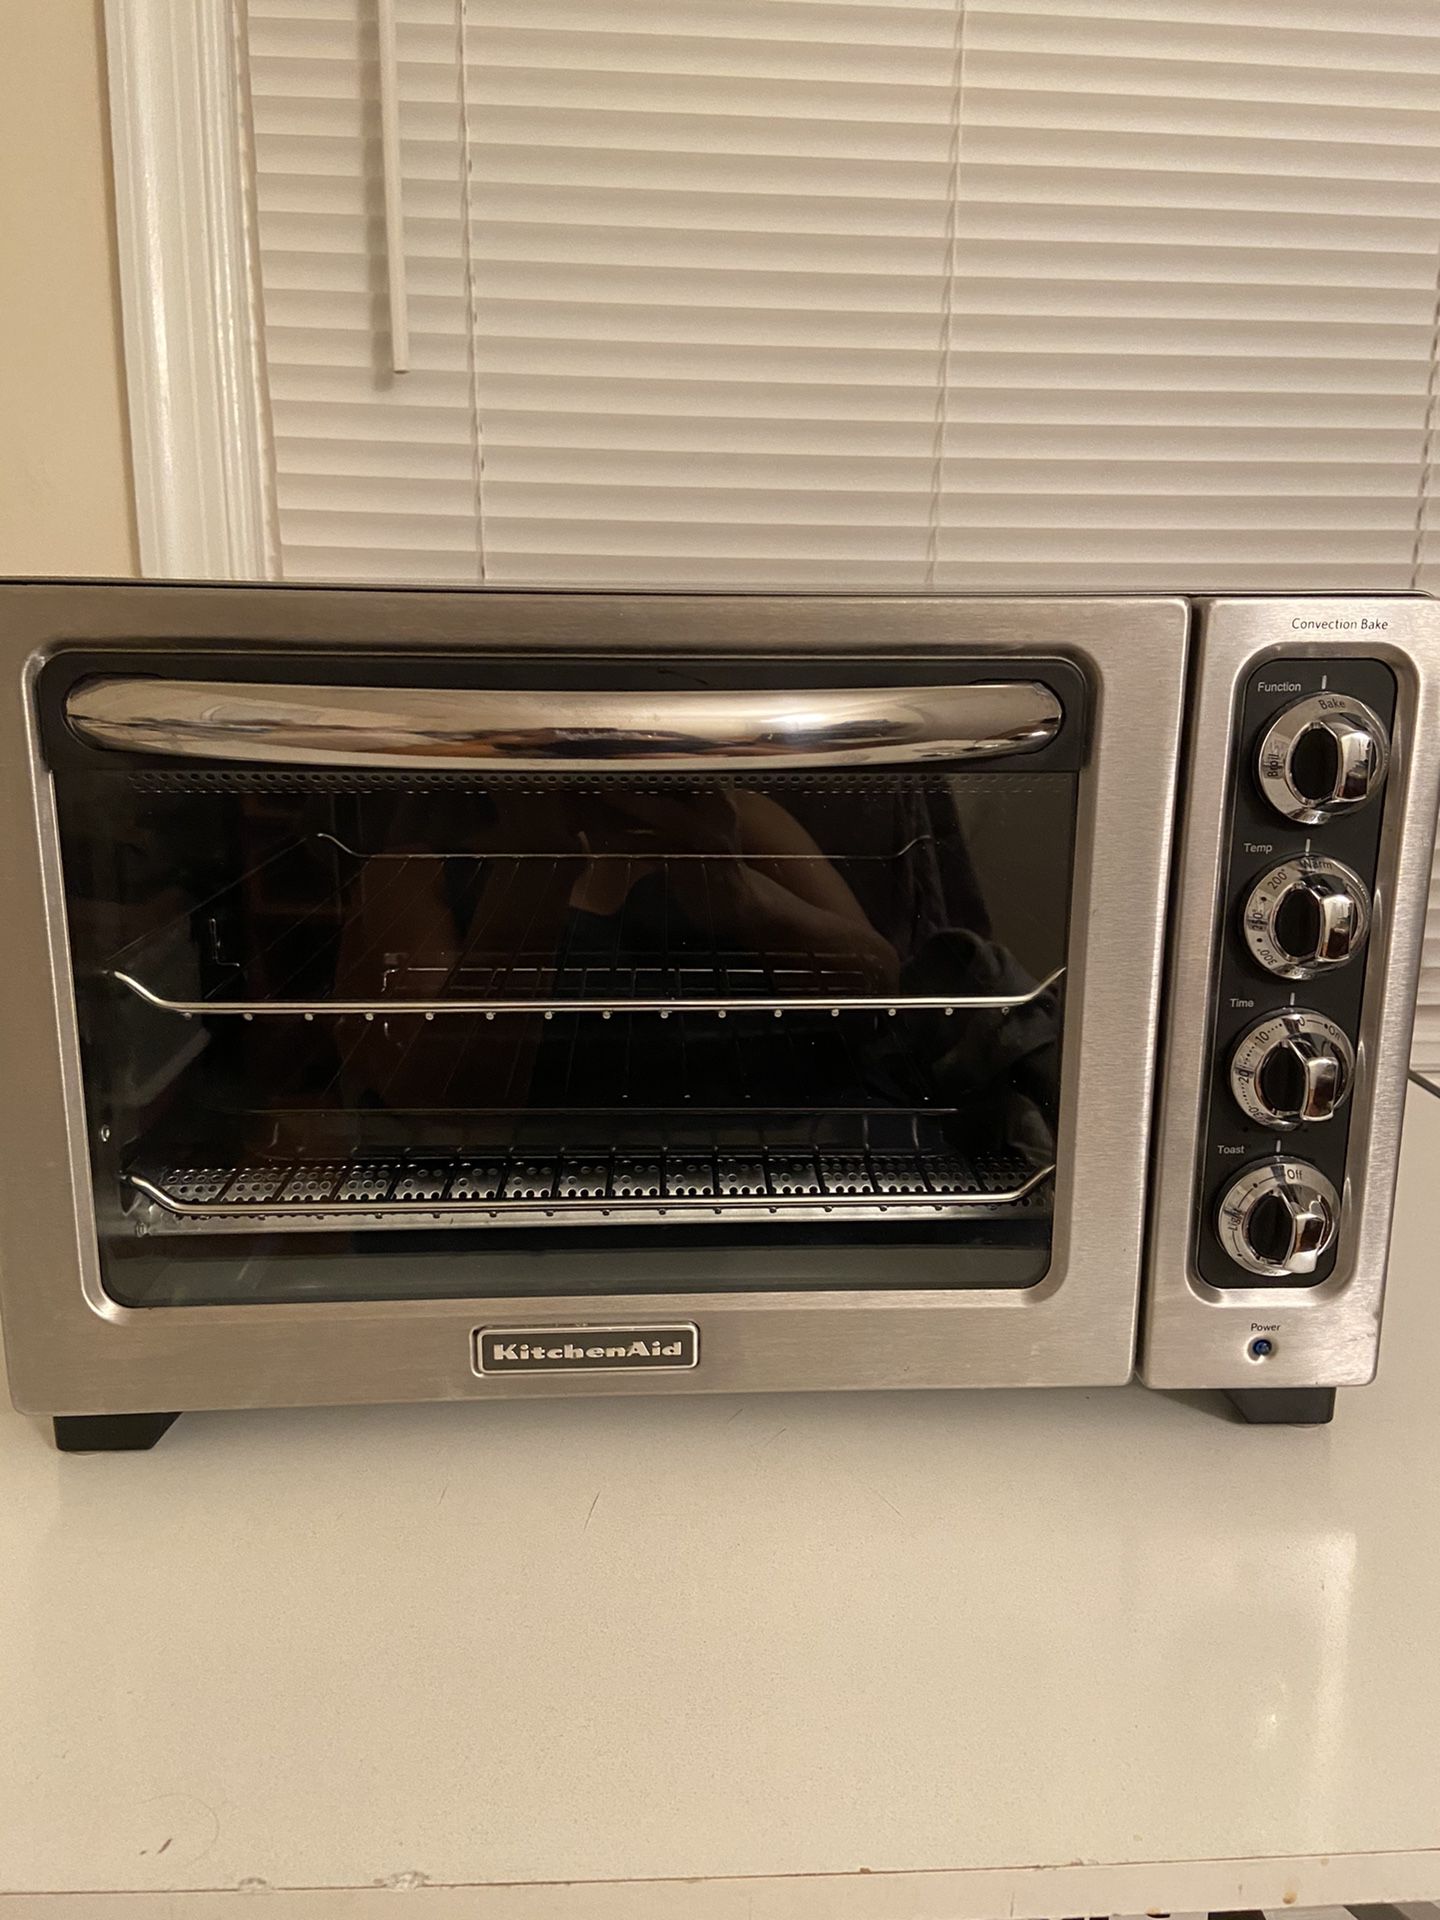 Kitchen Aid 12” Counter Top Oven and Toaster Model KCO223